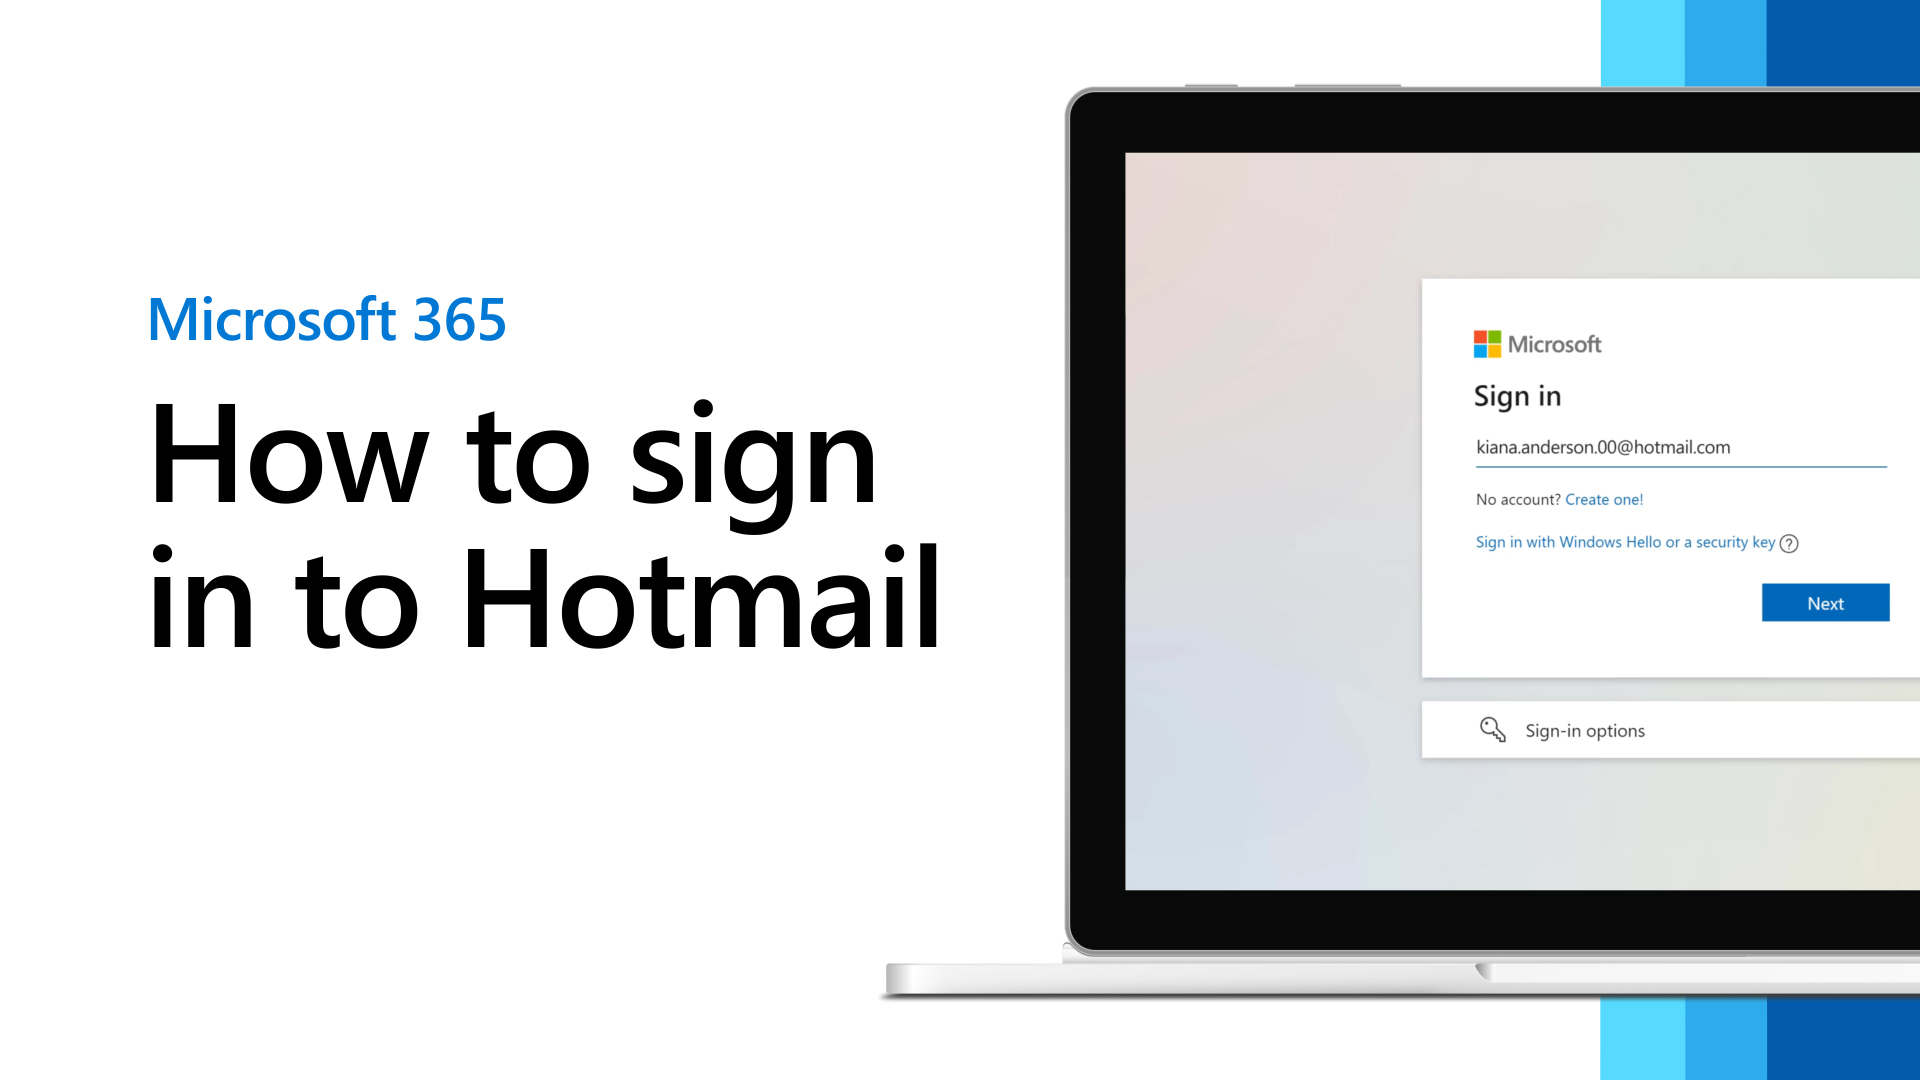 Hotmail Login 2018: How to Sign In Hotmail Email Account in 2 Minutes? 